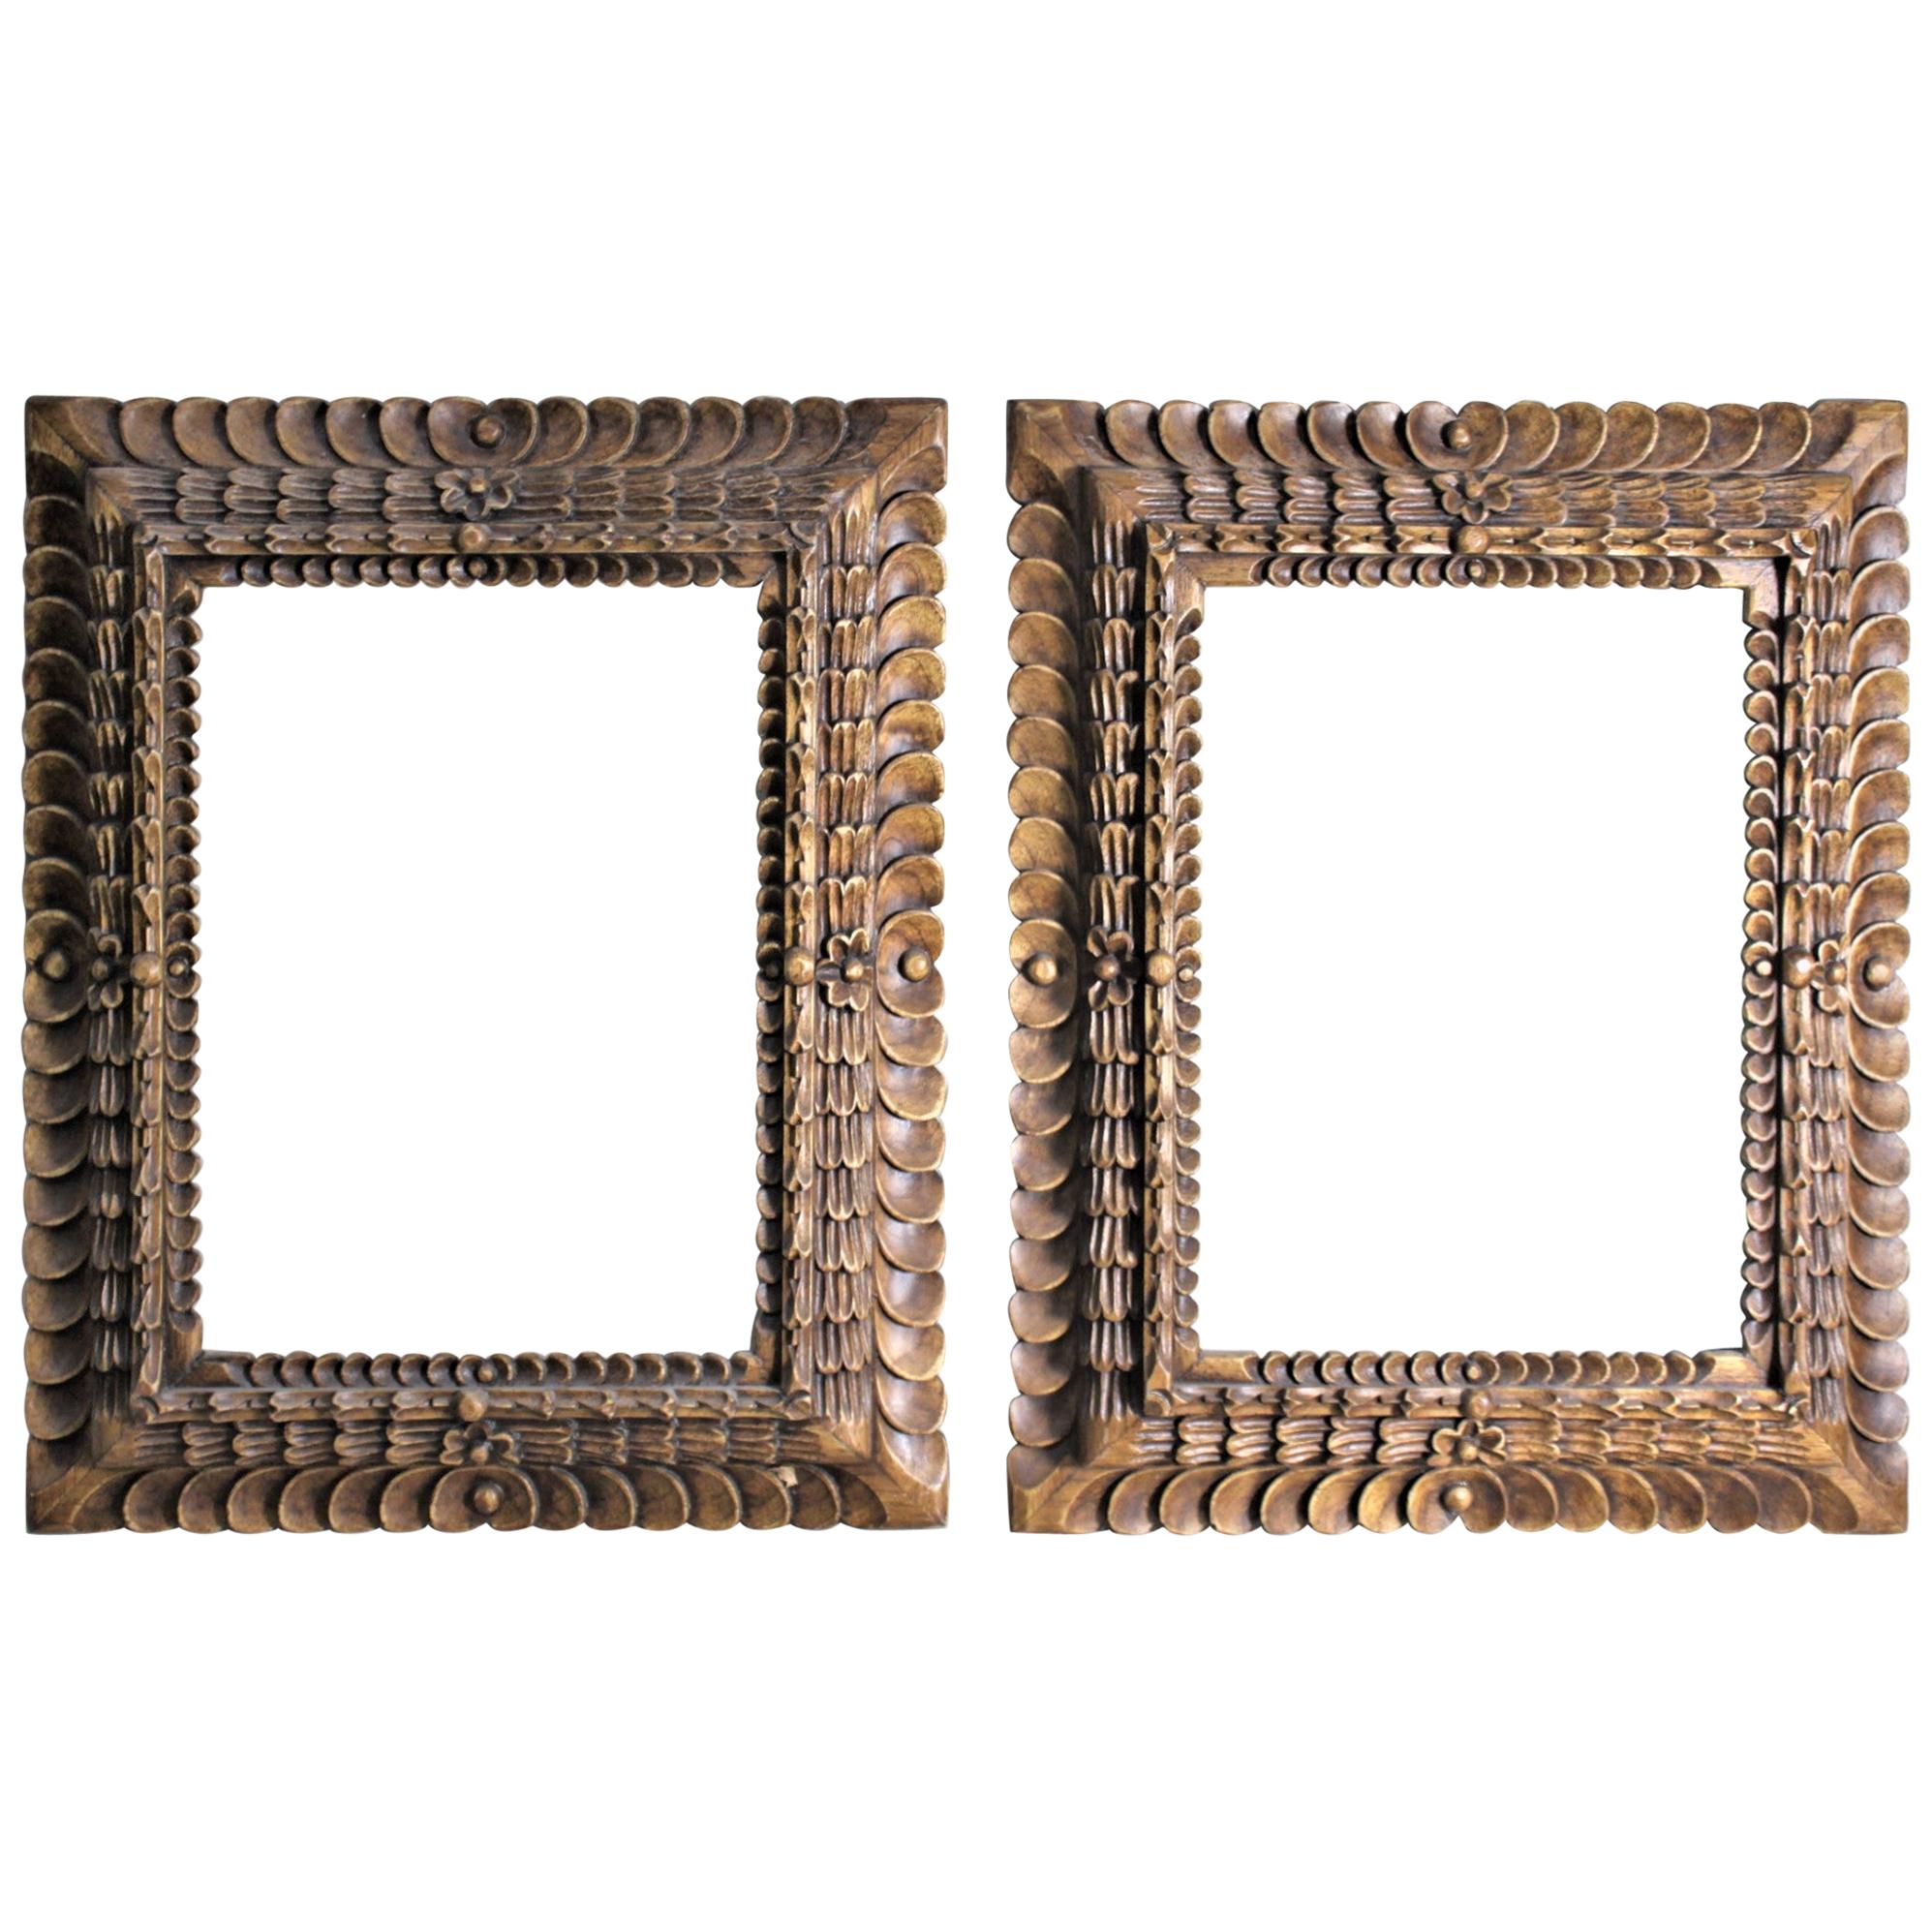 Pair of Vintage Ornately Hand-Carved Wooden Folk Art Styled Picture Frames